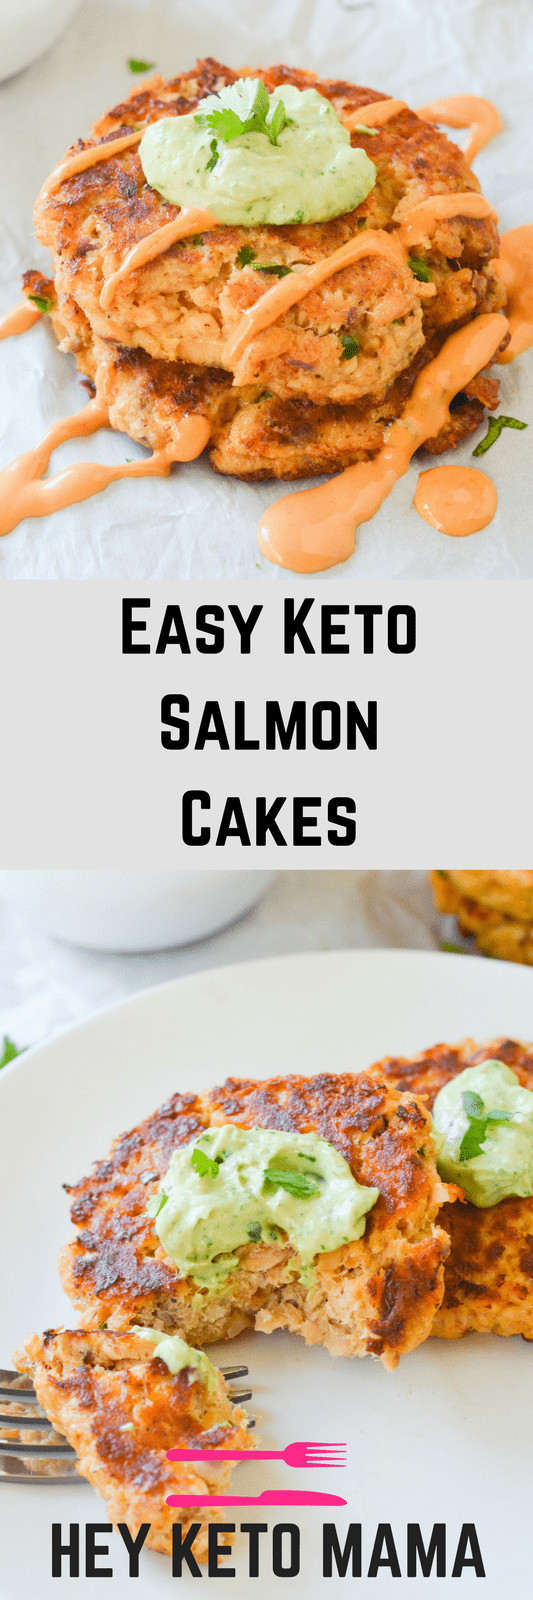 Low Carb Canned Salmon Recipes
 Easy Keto Salmon Cakes Recipe To health